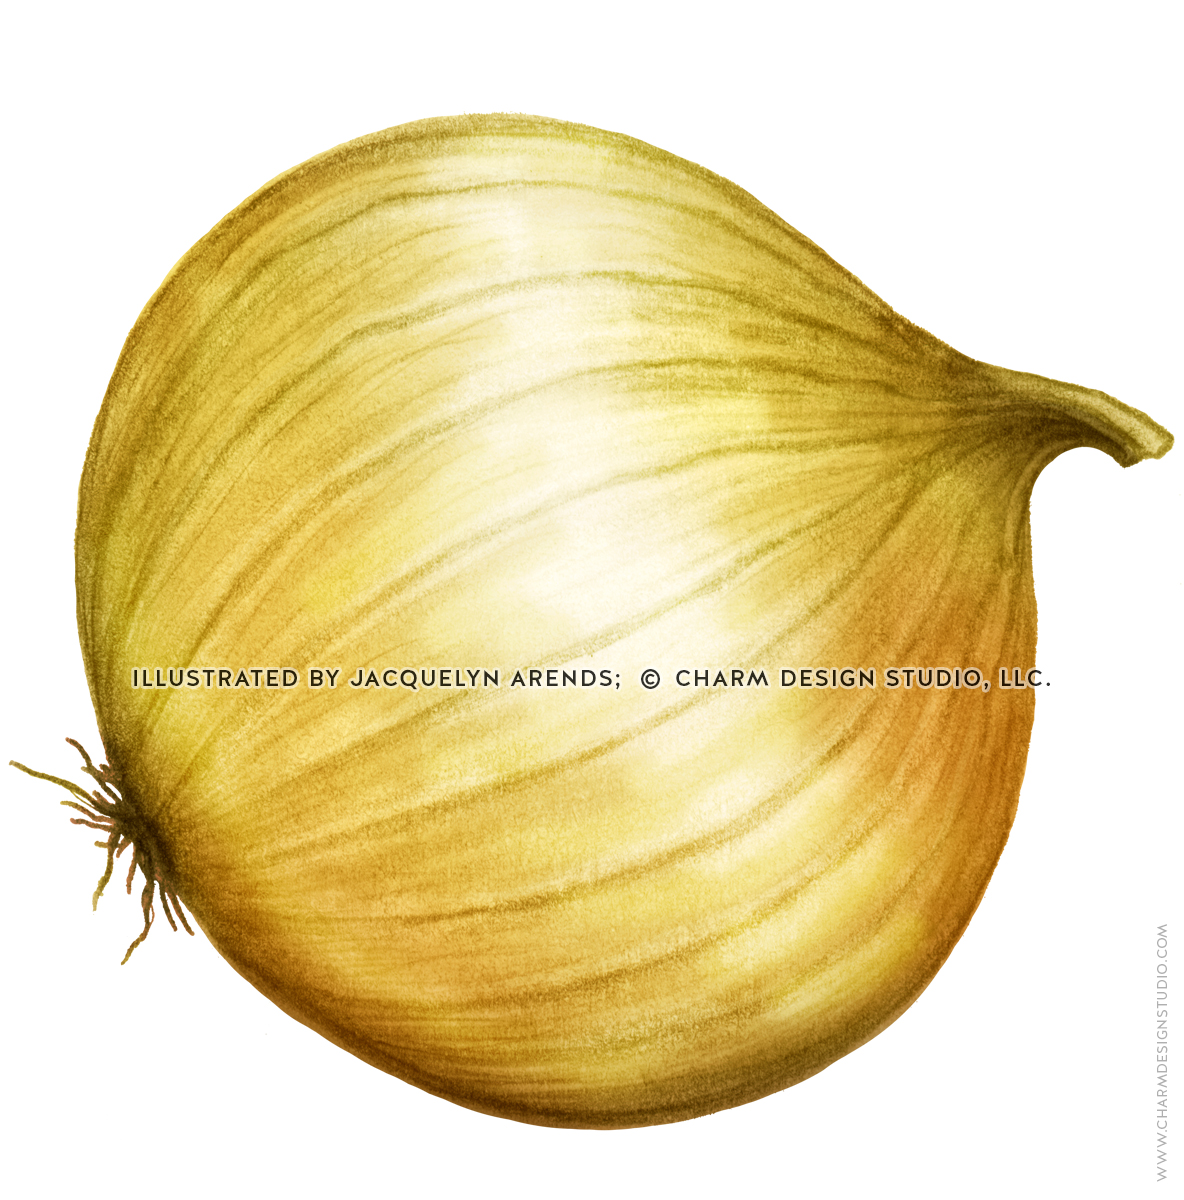 Food Illustrations by Jacquelyn Arends, © Charm Design Studio, LLC.